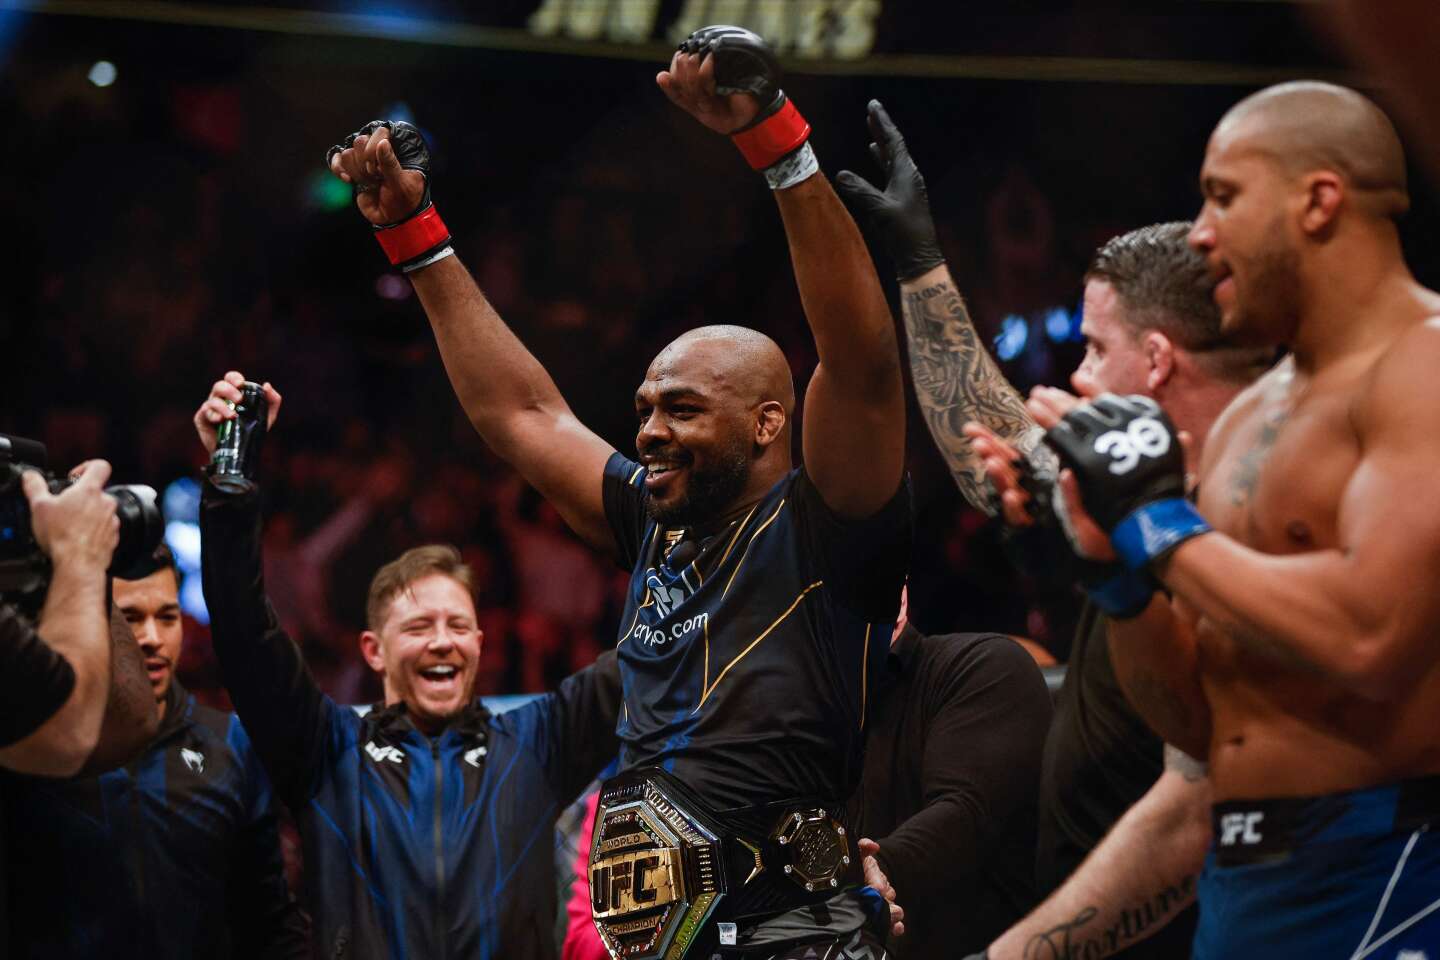 the French Ciryl Gane quickly beaten by the American Jon Jones, crowned UFC heavyweight champion